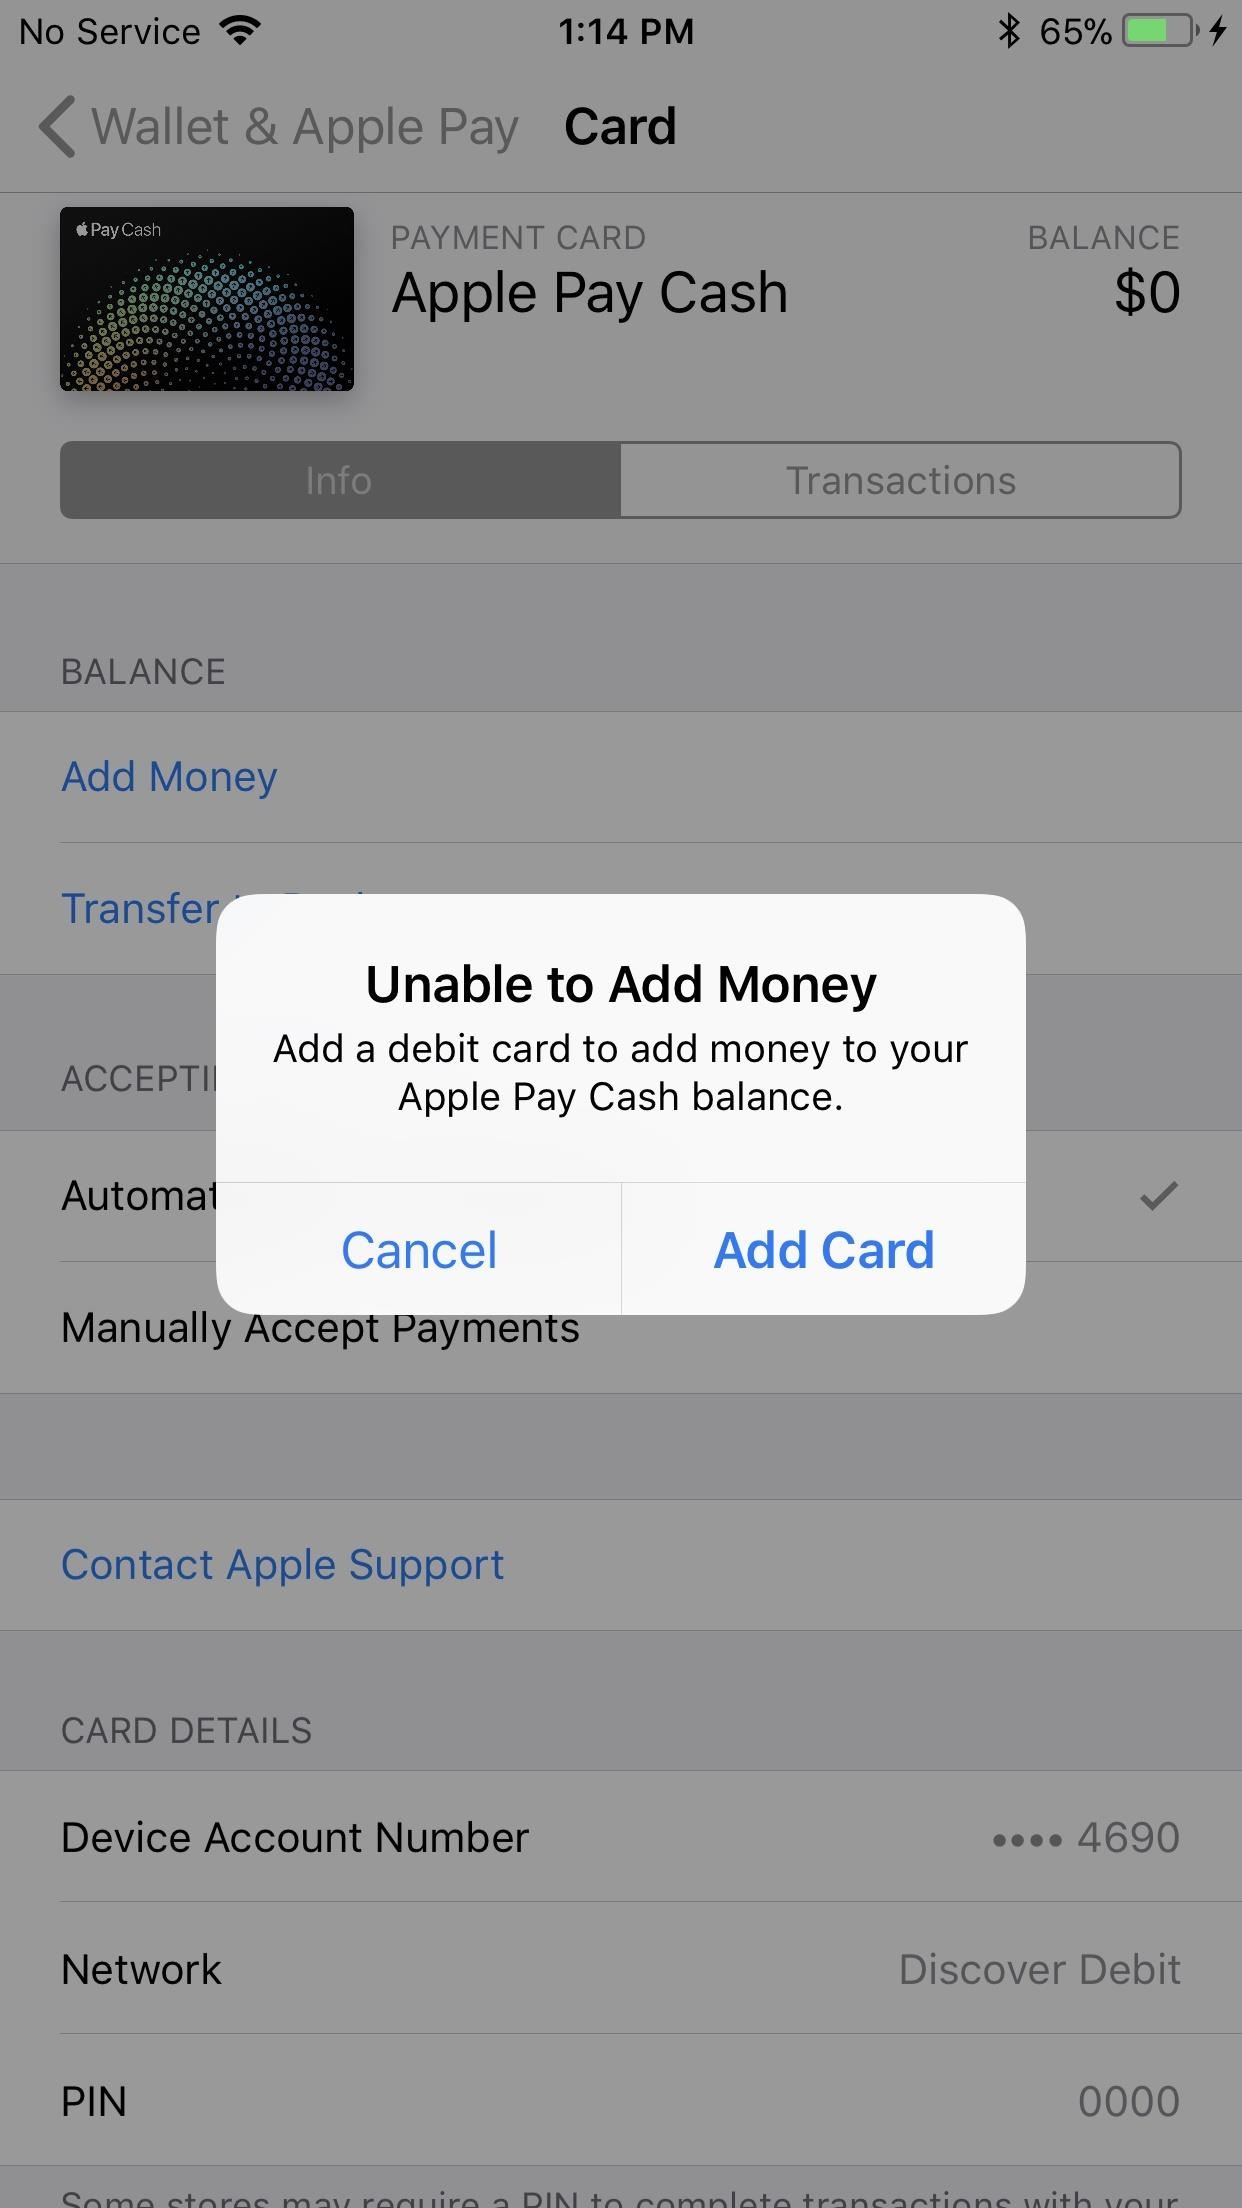 How to Send & Receive Apple Pay Cash via Messages on Your iPhone